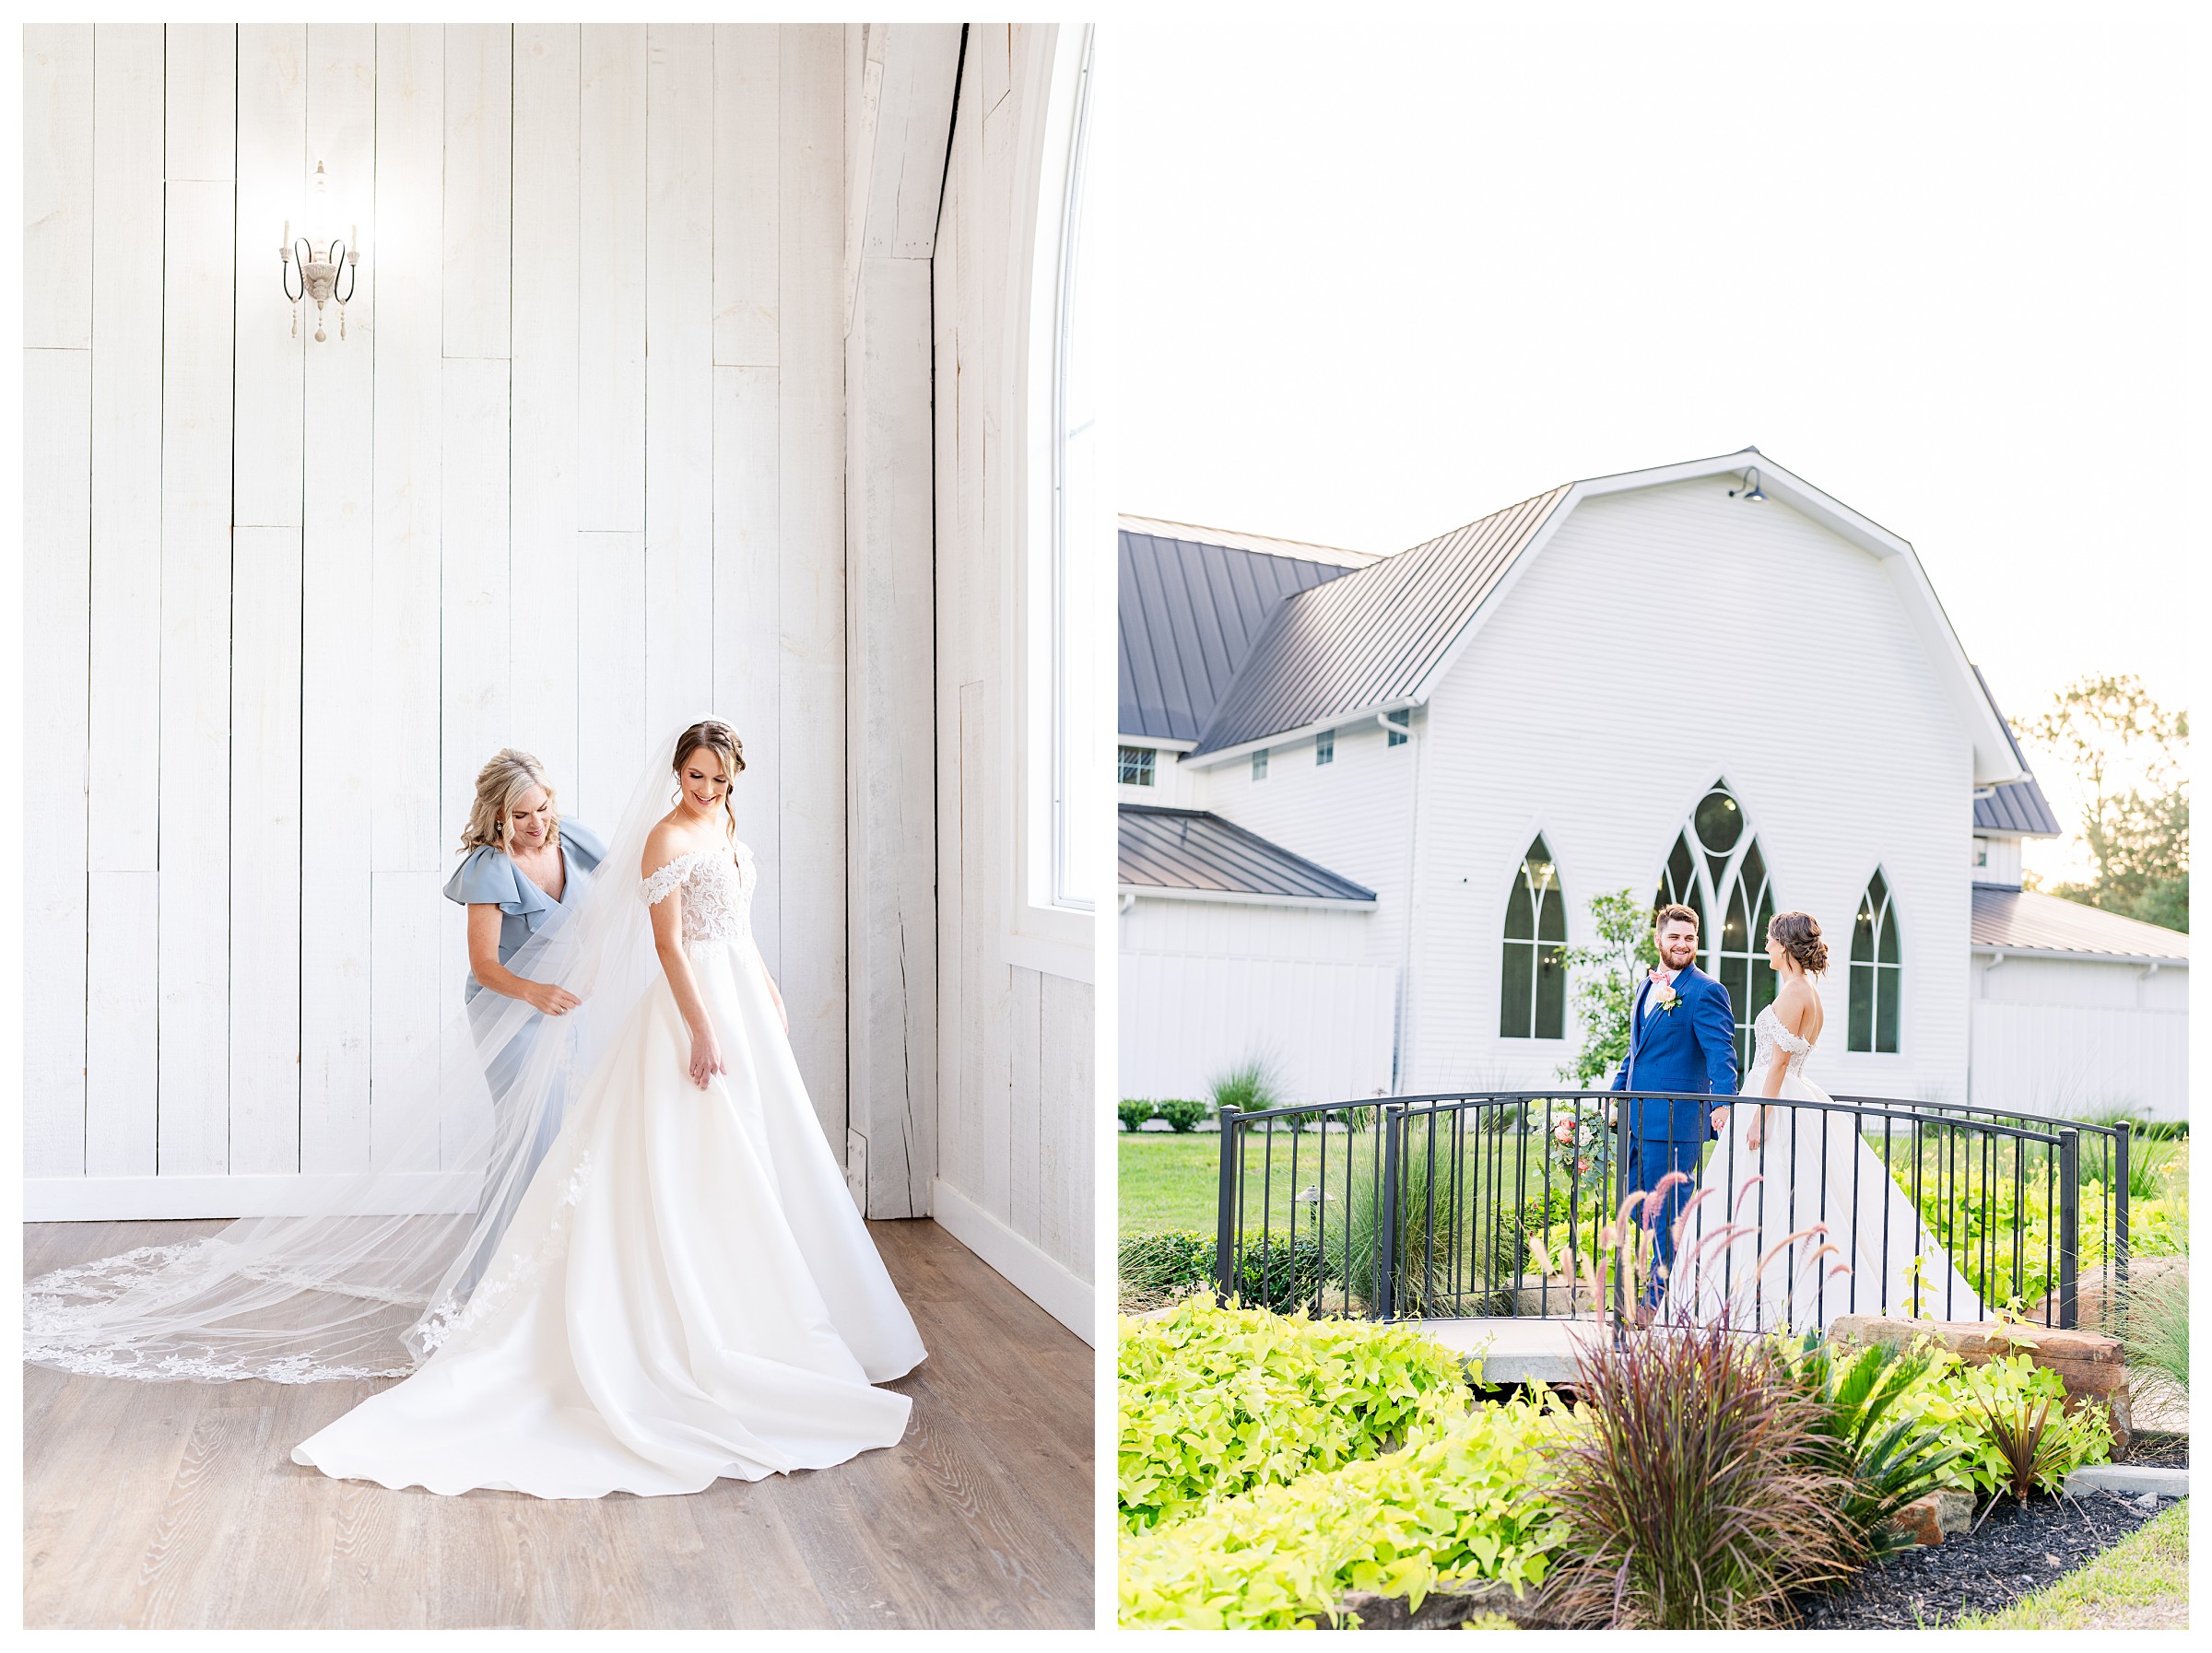 First image is of mom putting veil on daughter in her wedding dress while both are smiling in a white barn and second image is of groom leading bride across a bridge and smiling back at her with the Springs Wallisville wedding venue in the background